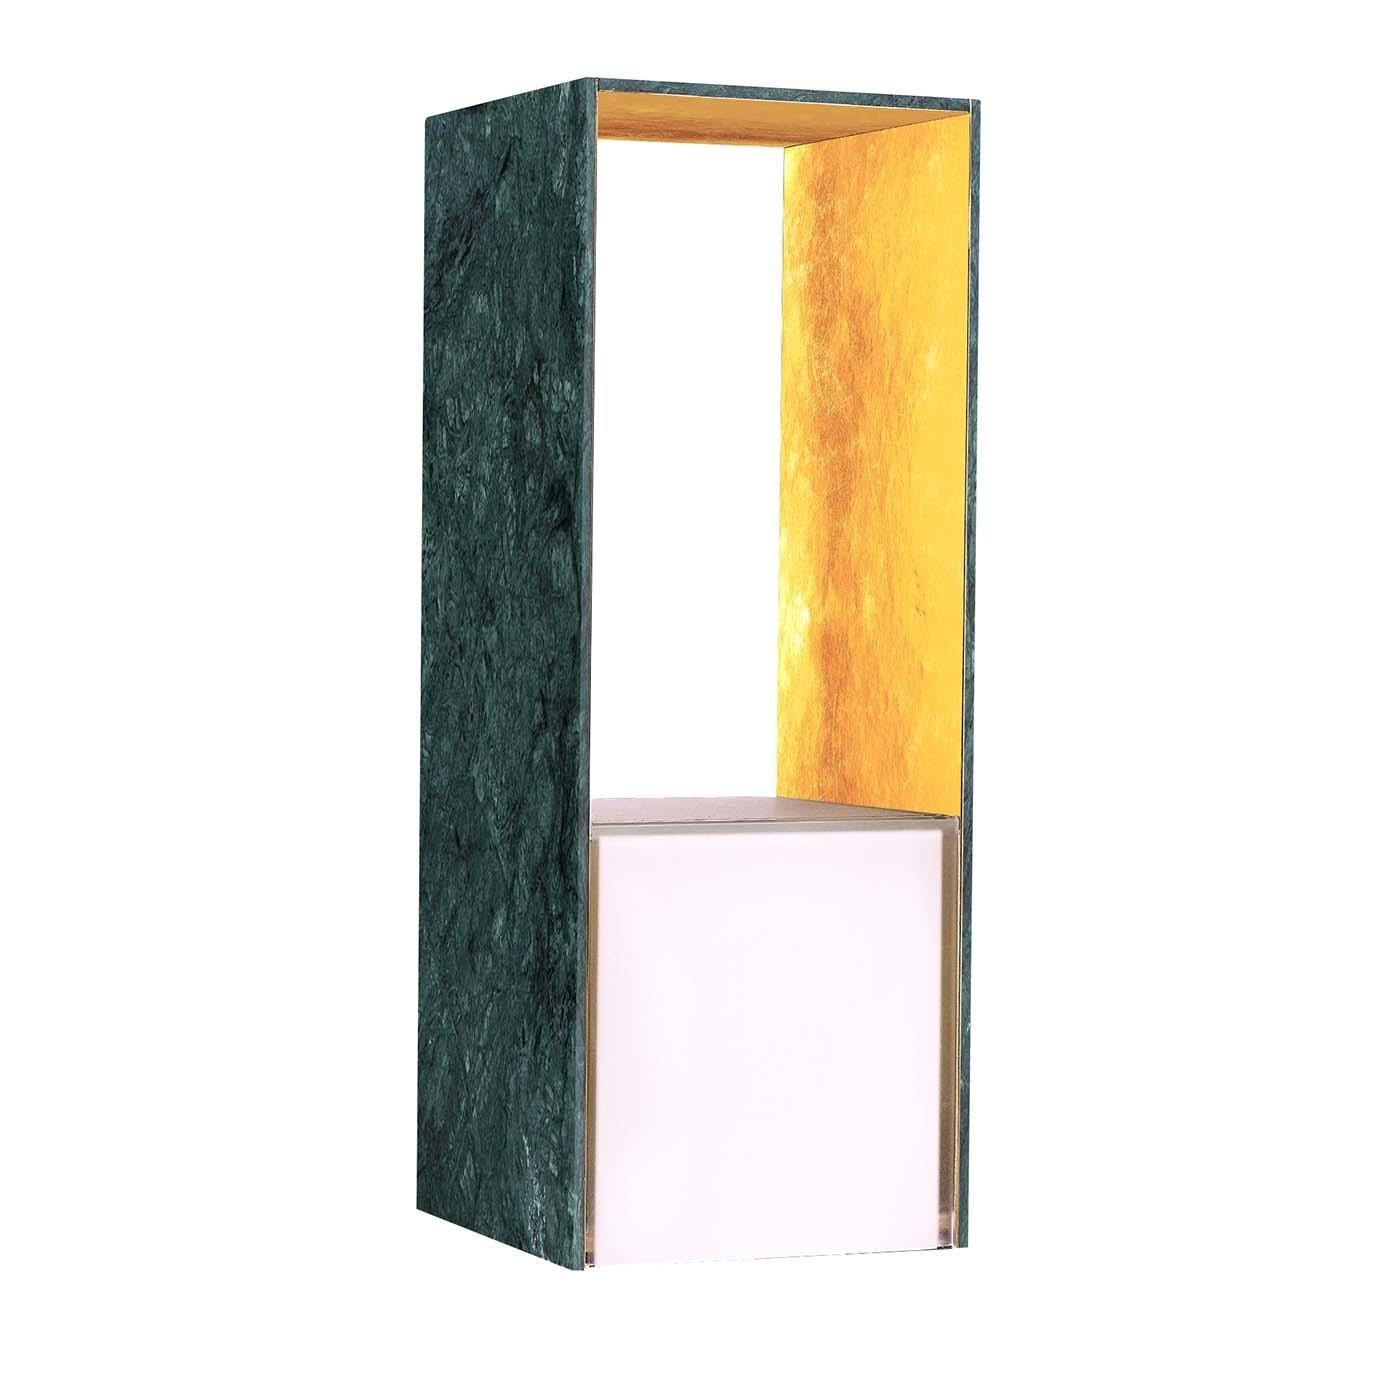 The presence table lamp in Verde Guatemala and gold is a fabulous LED lamp with indirect light and dimmable touch switch made of hand-worked marble coupled with metal using the Petramet technique and finished with gold or silver leaf. The spread of